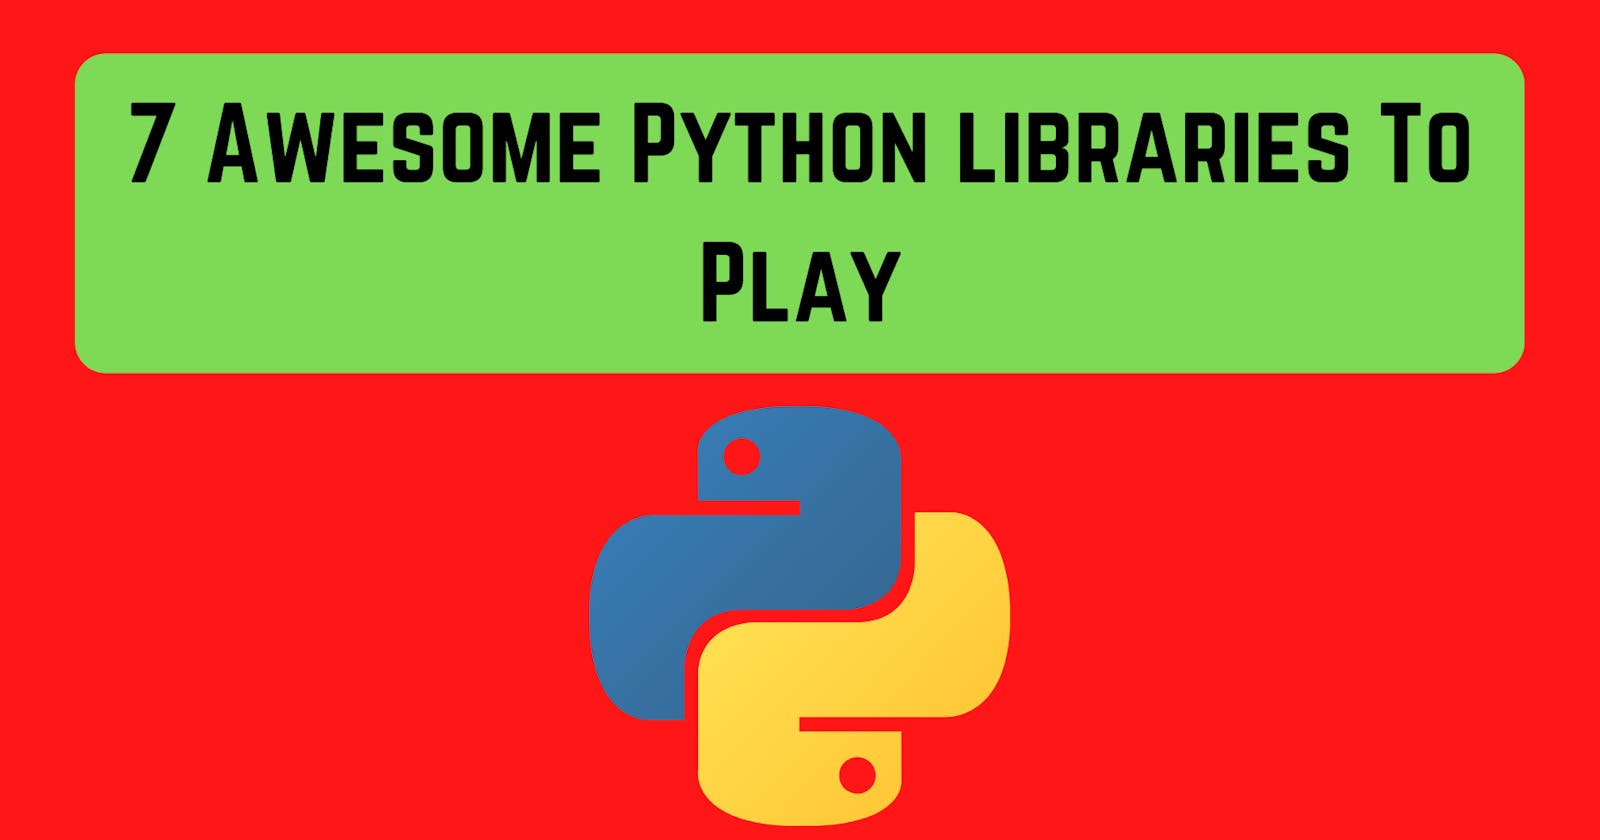 7 Awesome Python Libraries To Play